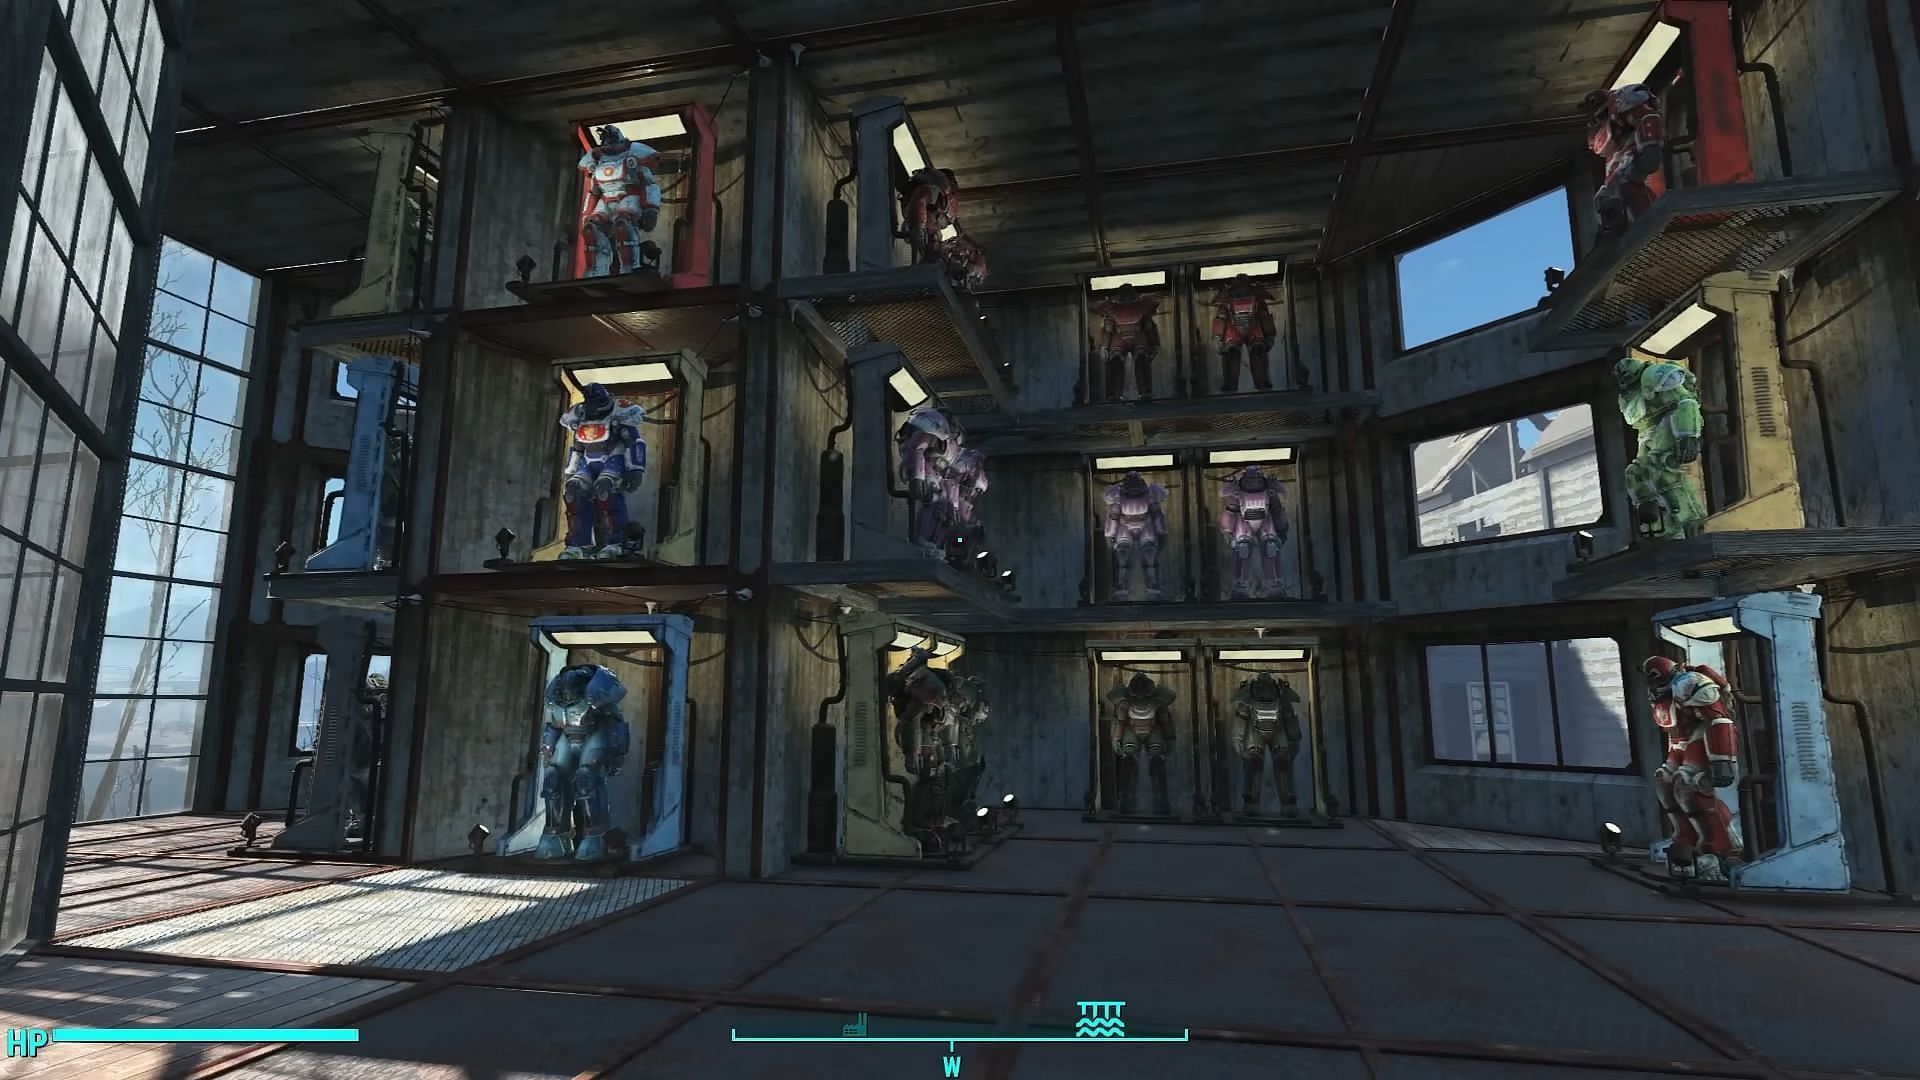 All Power Armor in Fallout 4 (Image via Bethesda Softworks || Oxhorn on YouTube)